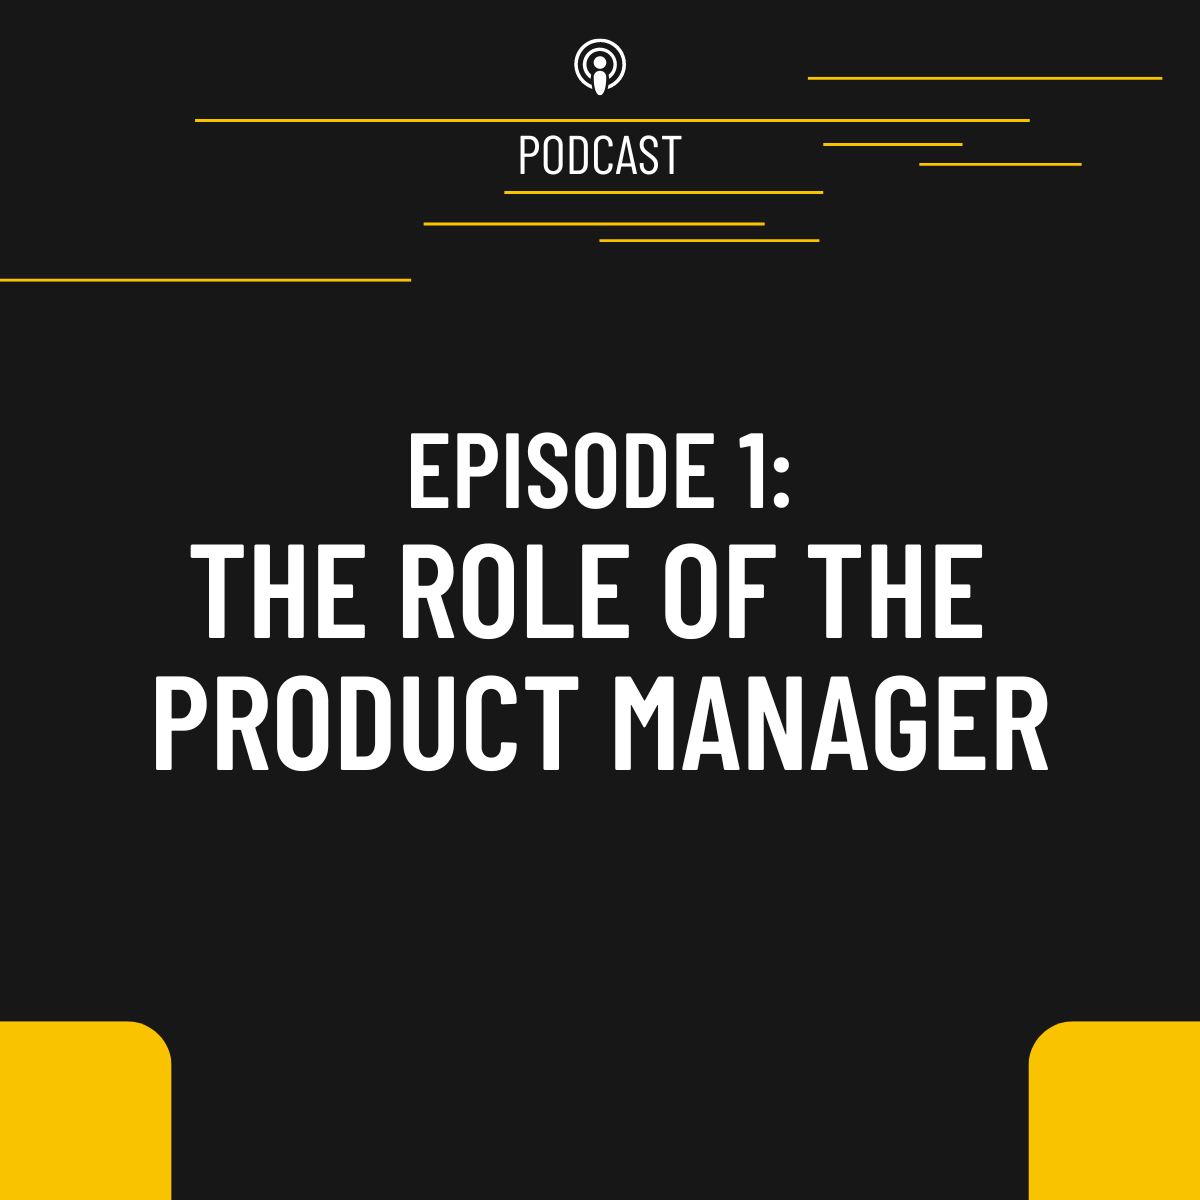 The Role of the Product Manager